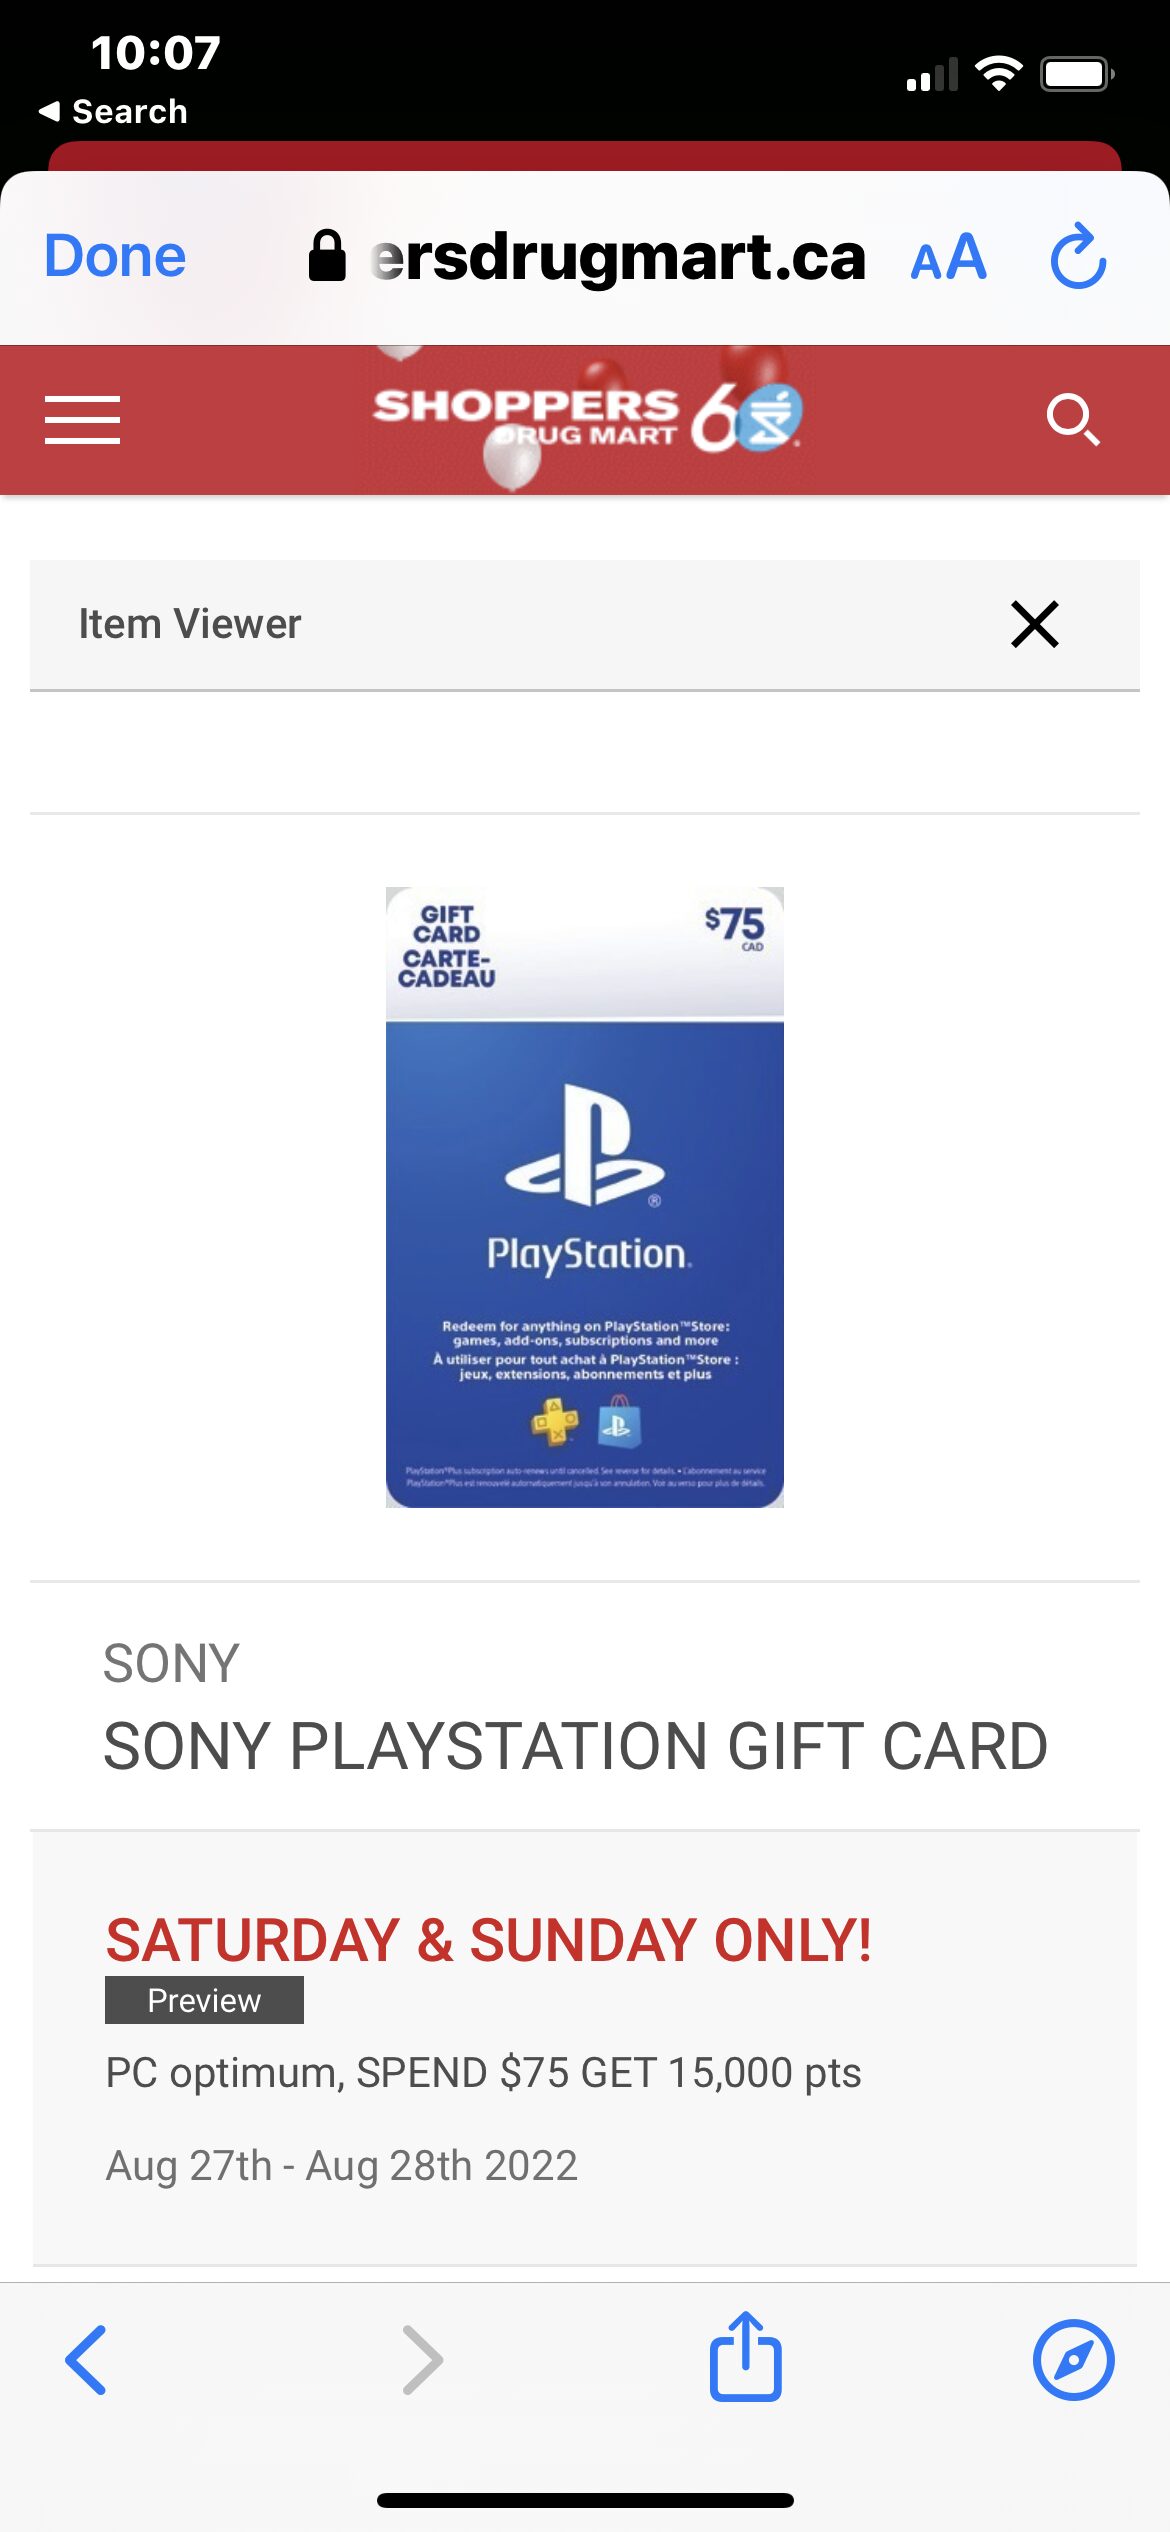 PlayStation Store Gift Card $75